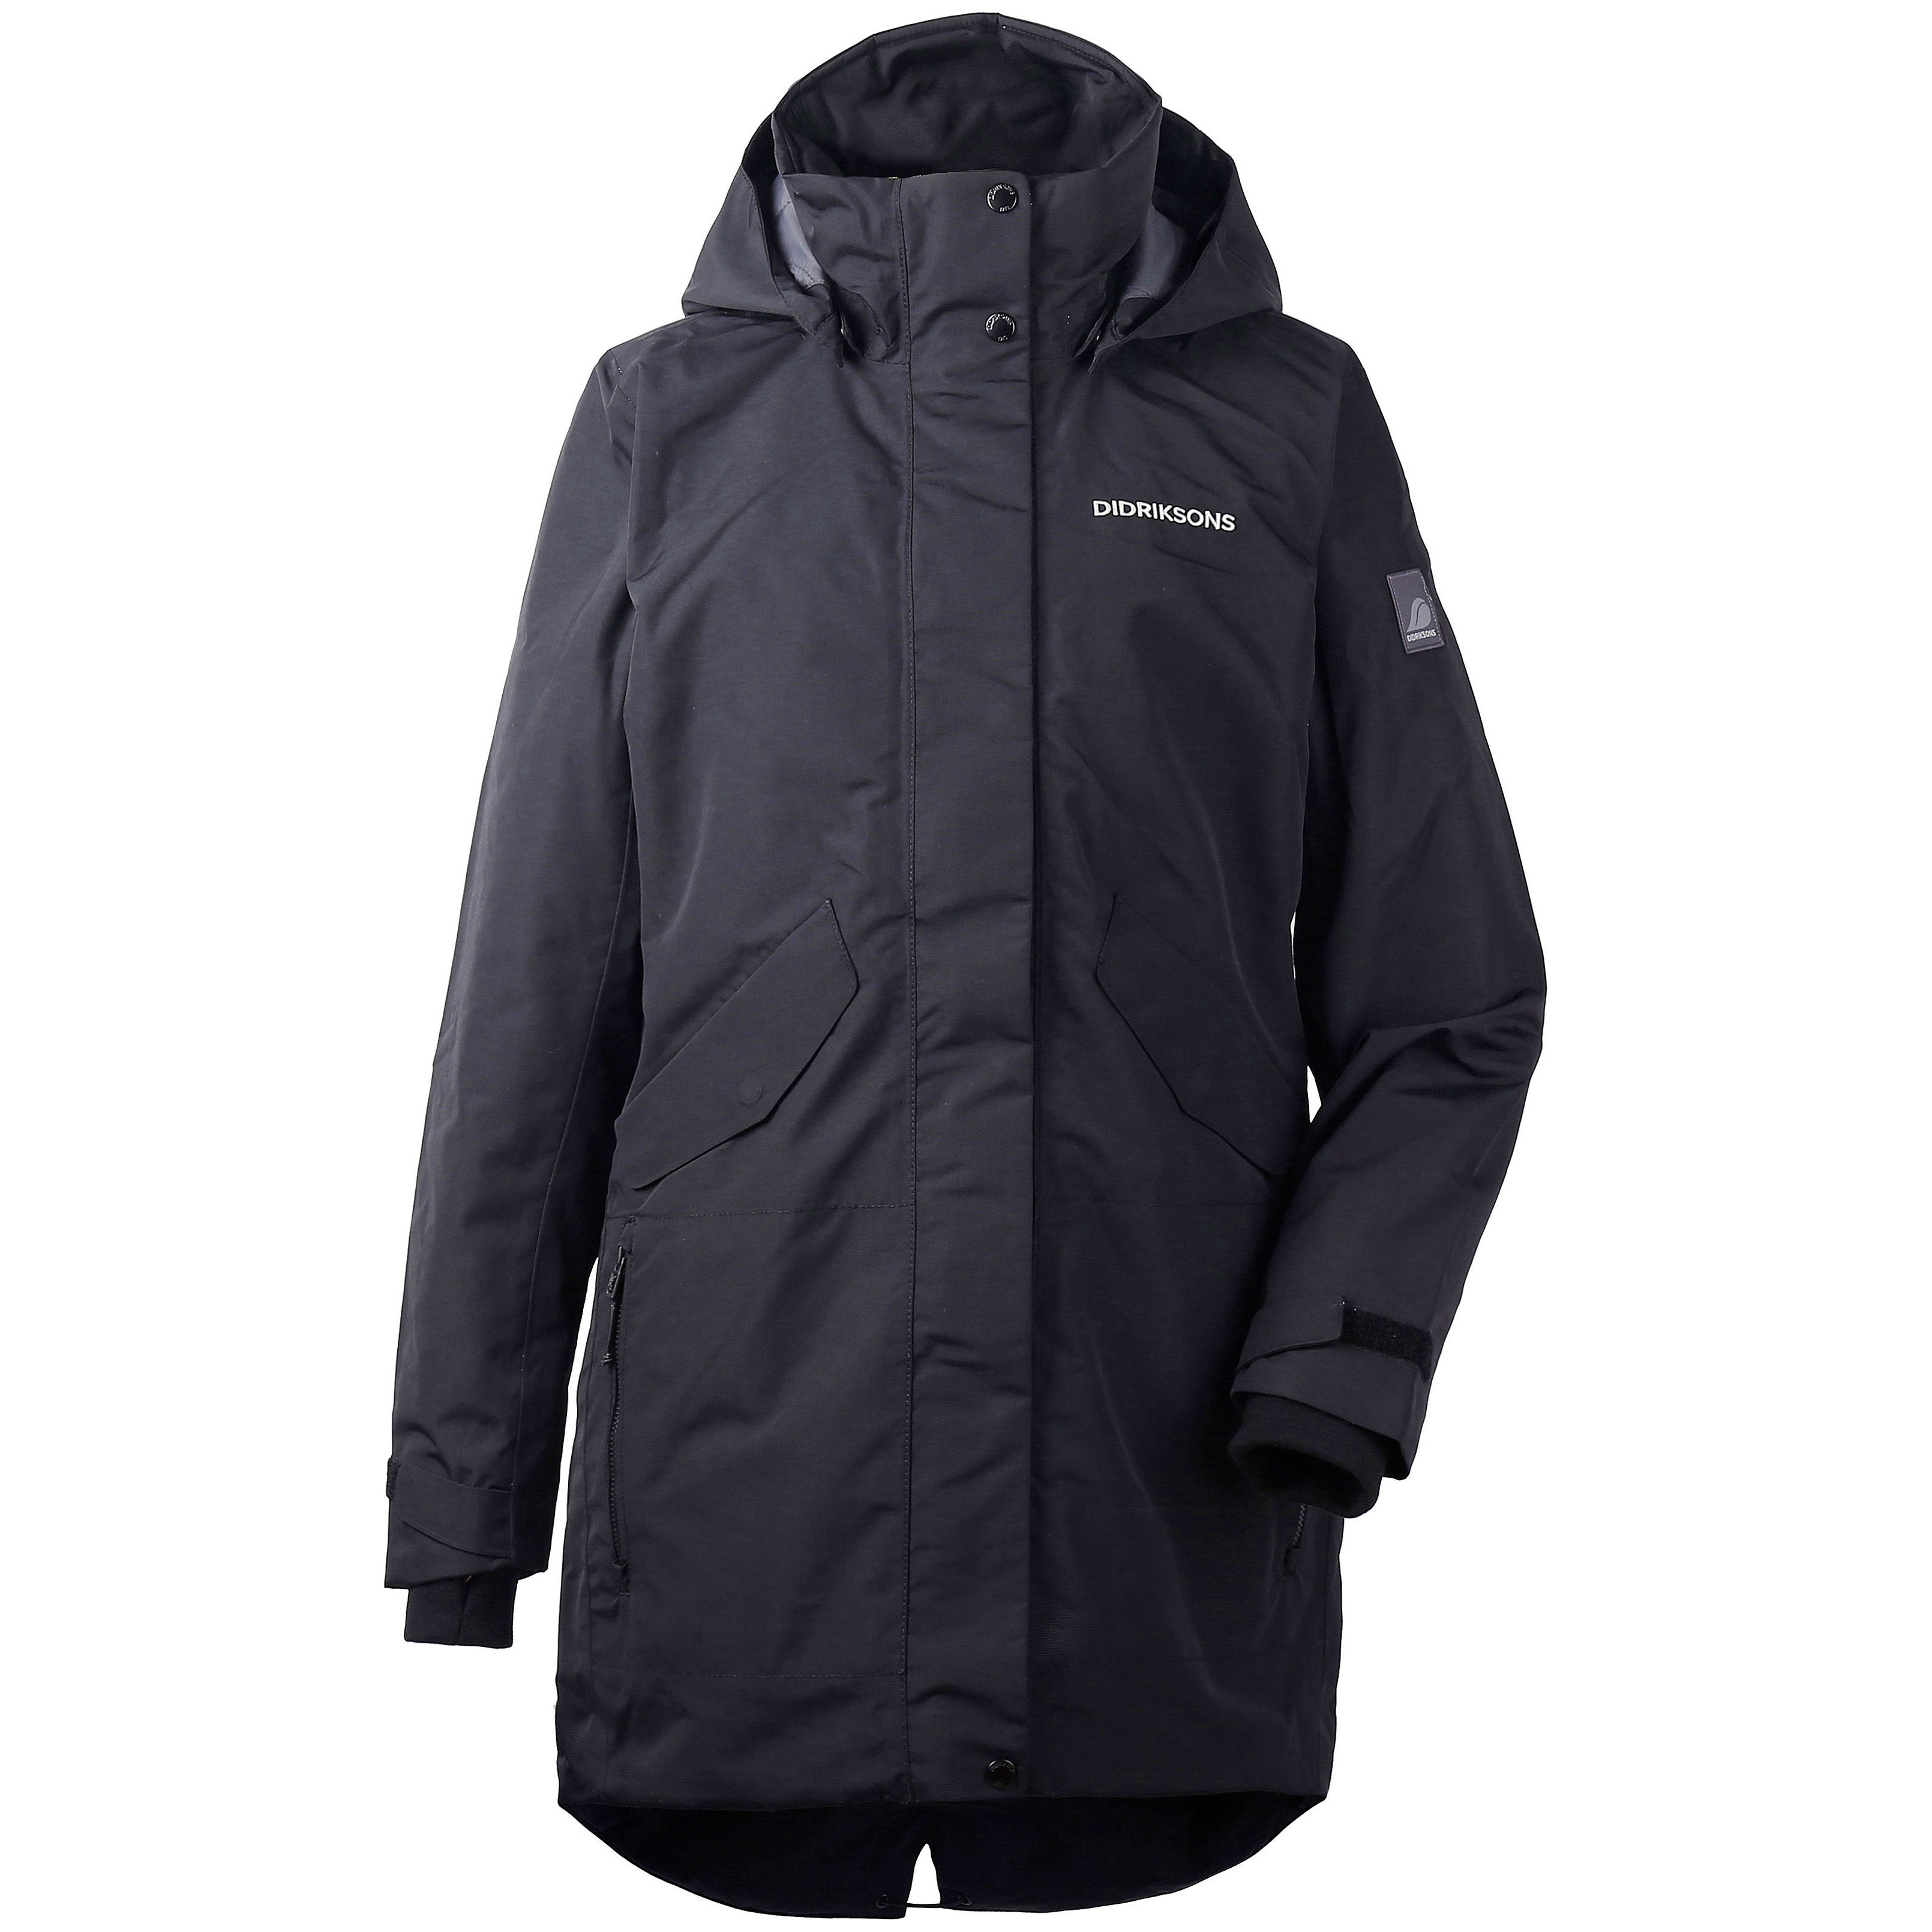 Didriksons Tanja Women's Parka 2 from Outnorth